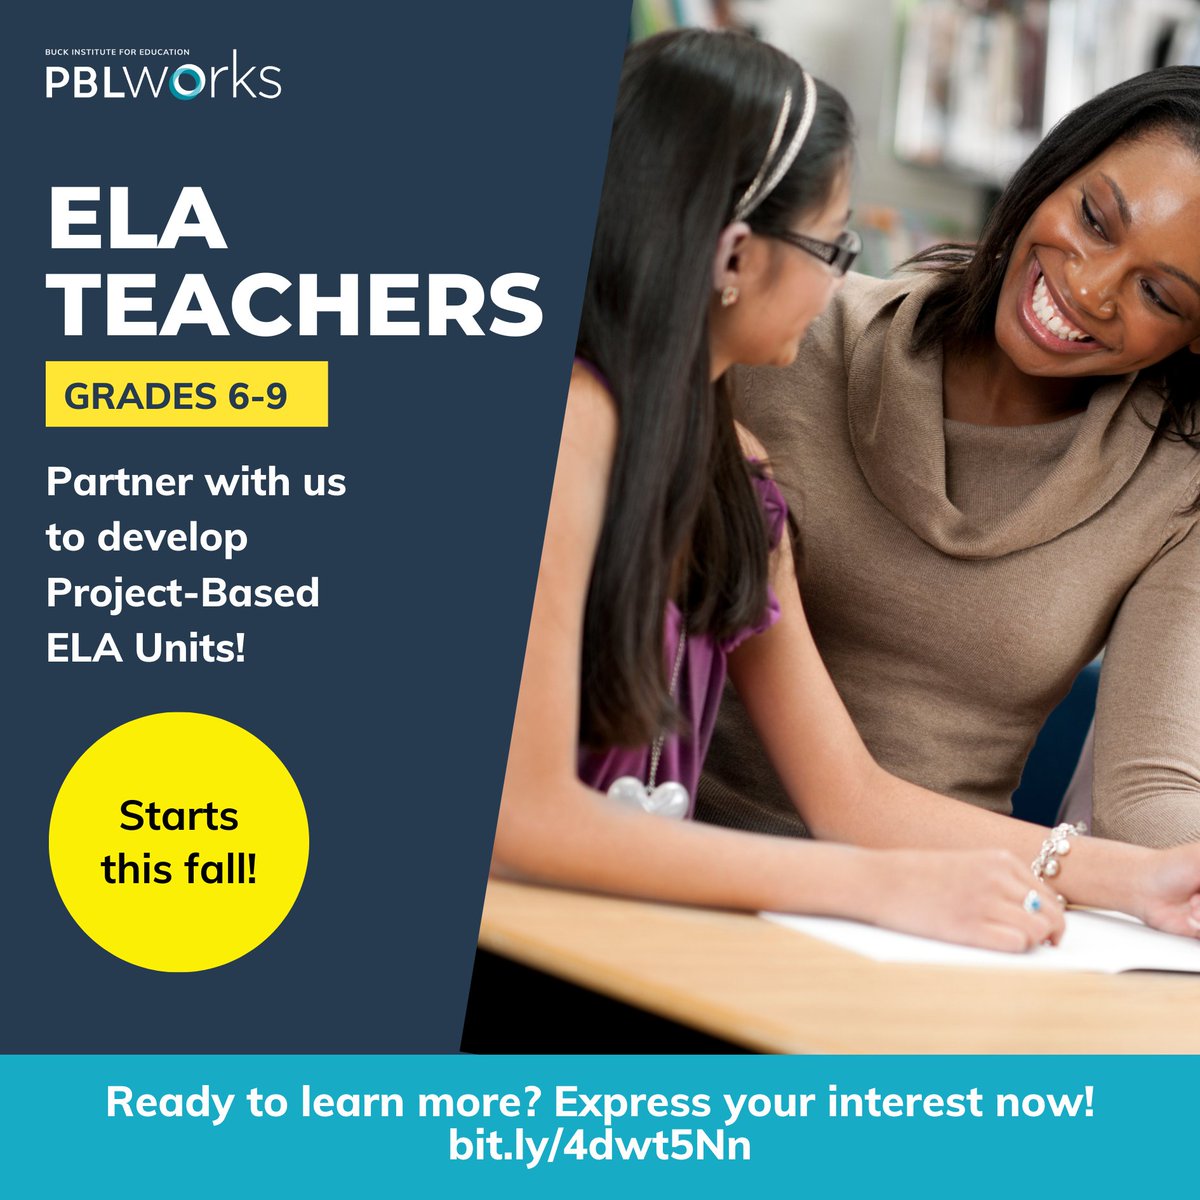 Calling in ELA teachers grades 6-9! Partner with the PBLWorks curriculum team and educators nationwide to co-create impactful ELA project-based units. Earn financial rewards for your valuable contributions! Details here: bit.ly/4ahiiUs #elateachers #ELA #middleschoolELA